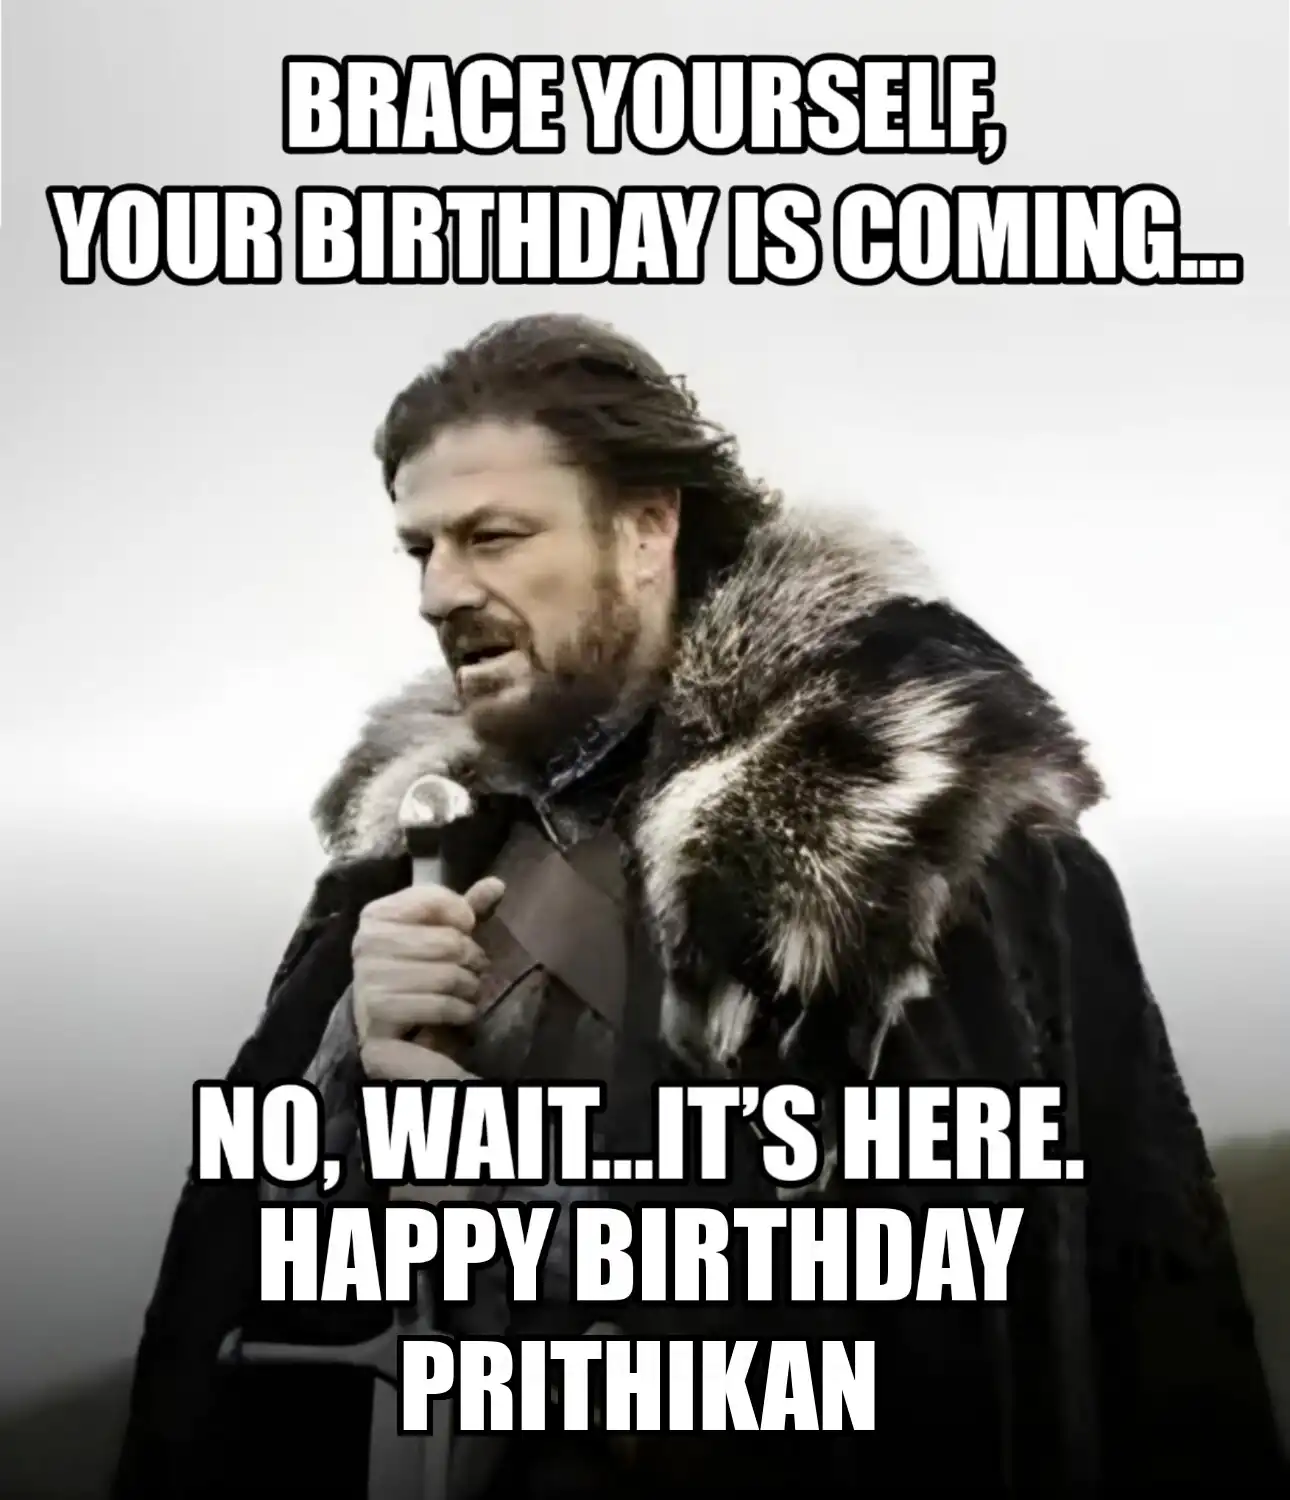 Happy Birthday Prithikan Brace Yourself Your Birthday Is Coming Meme